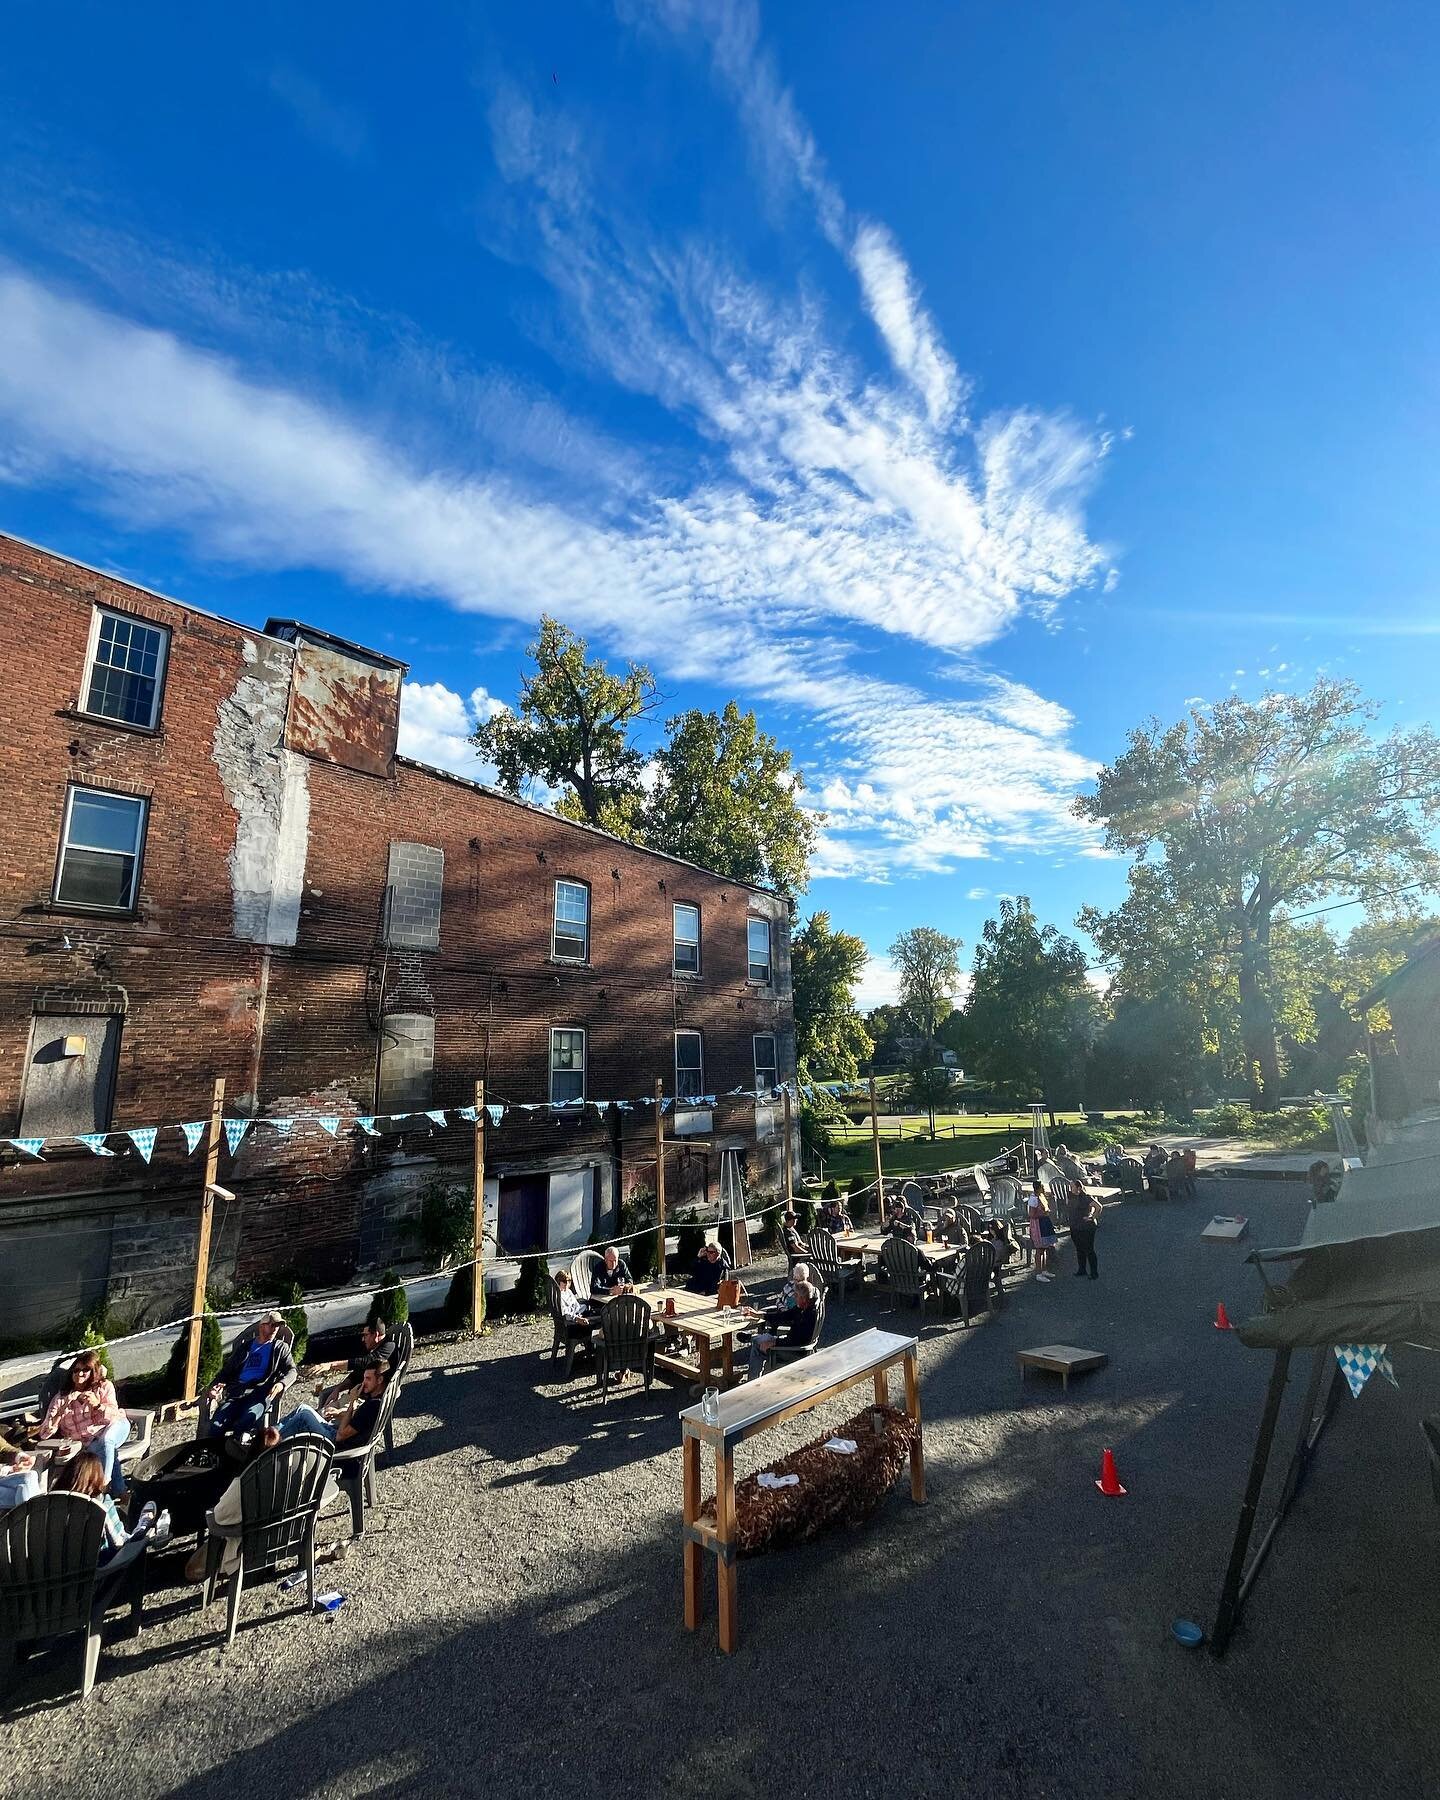 Slickfin Brewing loves to bring people together 🫱🏻&zwj;🫲🏼 and this October they have lots of events lined up! 🍺 Grab your family and friends and spend a beautiful autumn day in the heart of Fort Edward 🍂 

TODAY! 10/1 - Slicktoberfest is going 